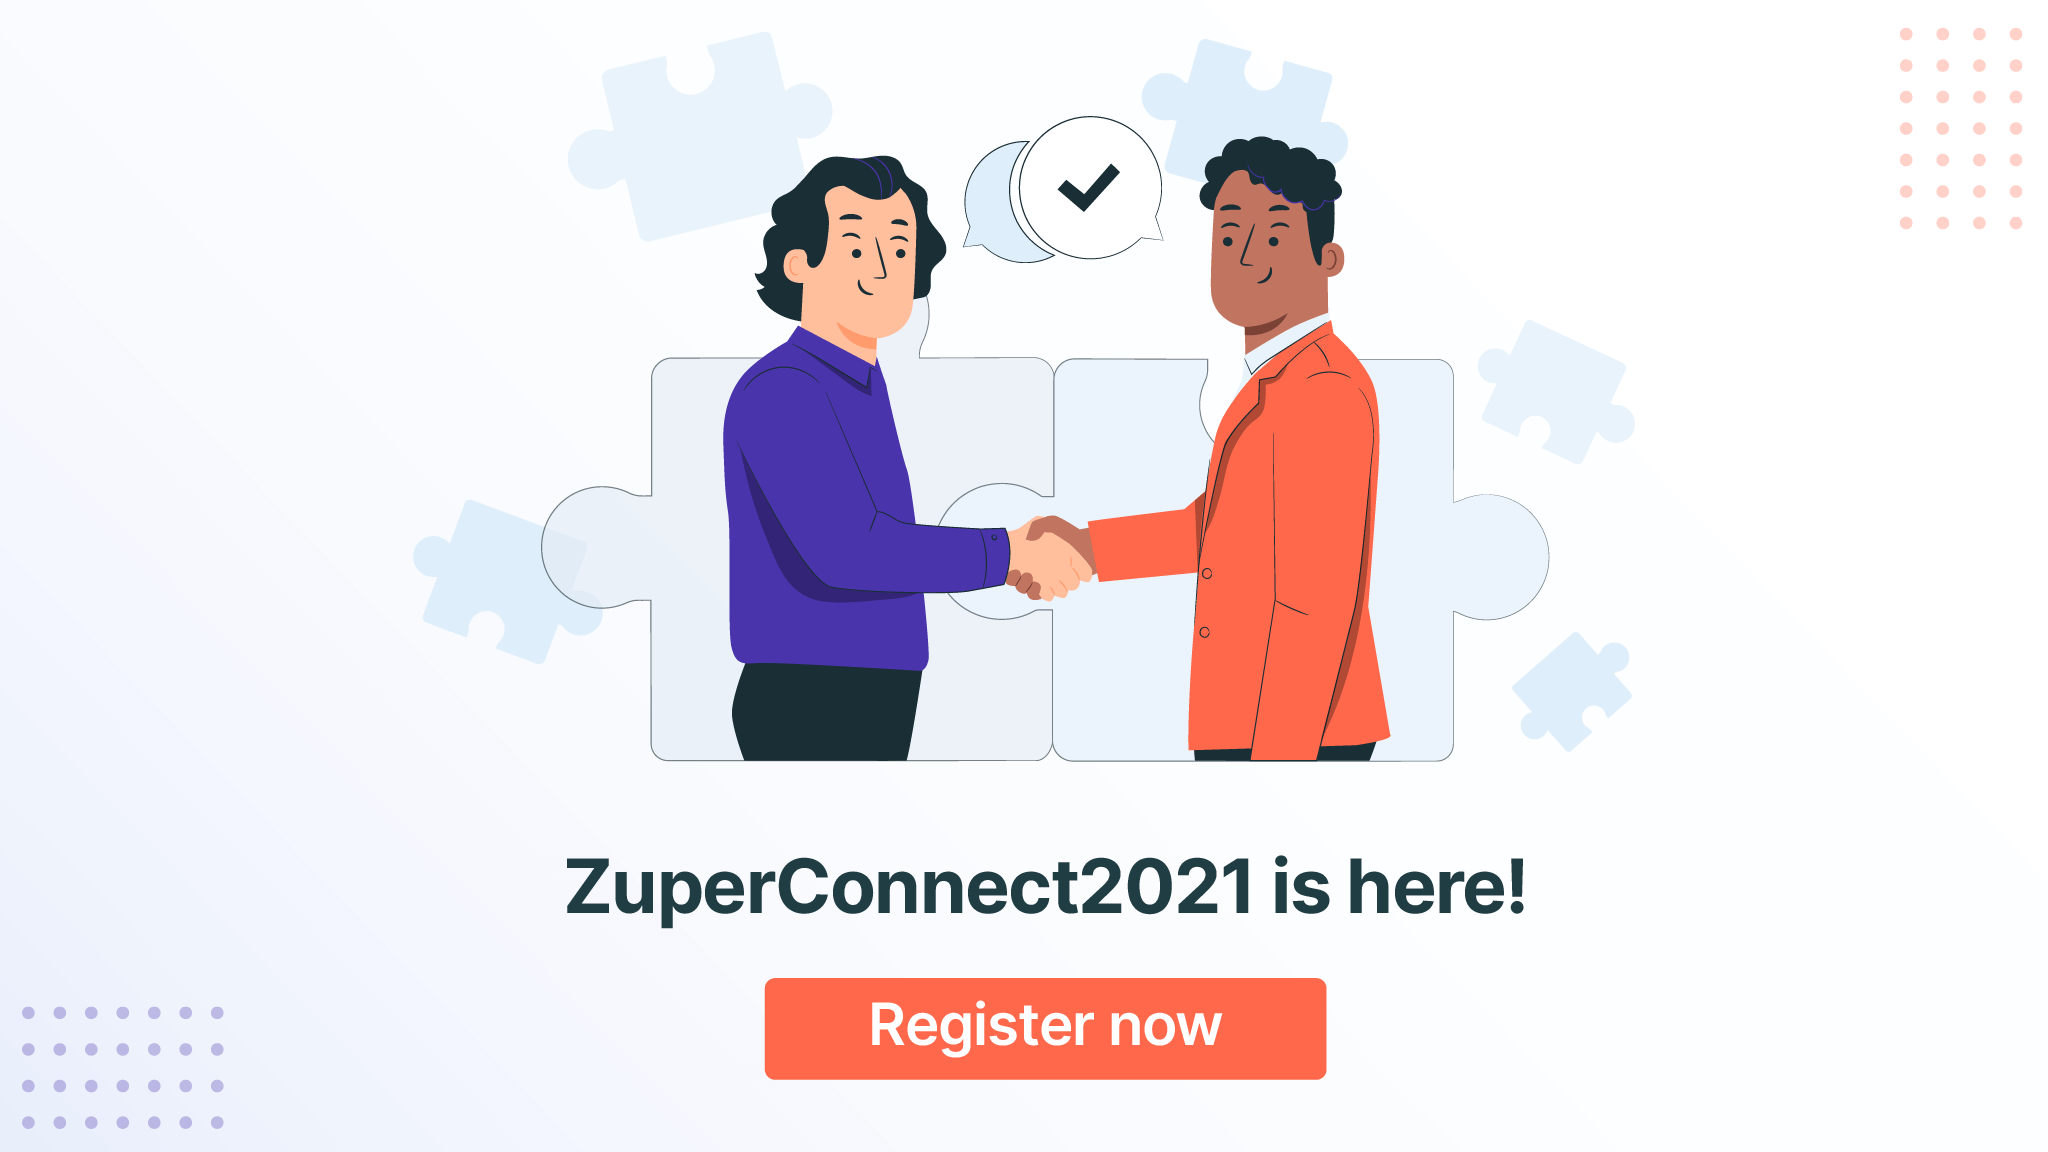 Zuperconnect2021-is-here!